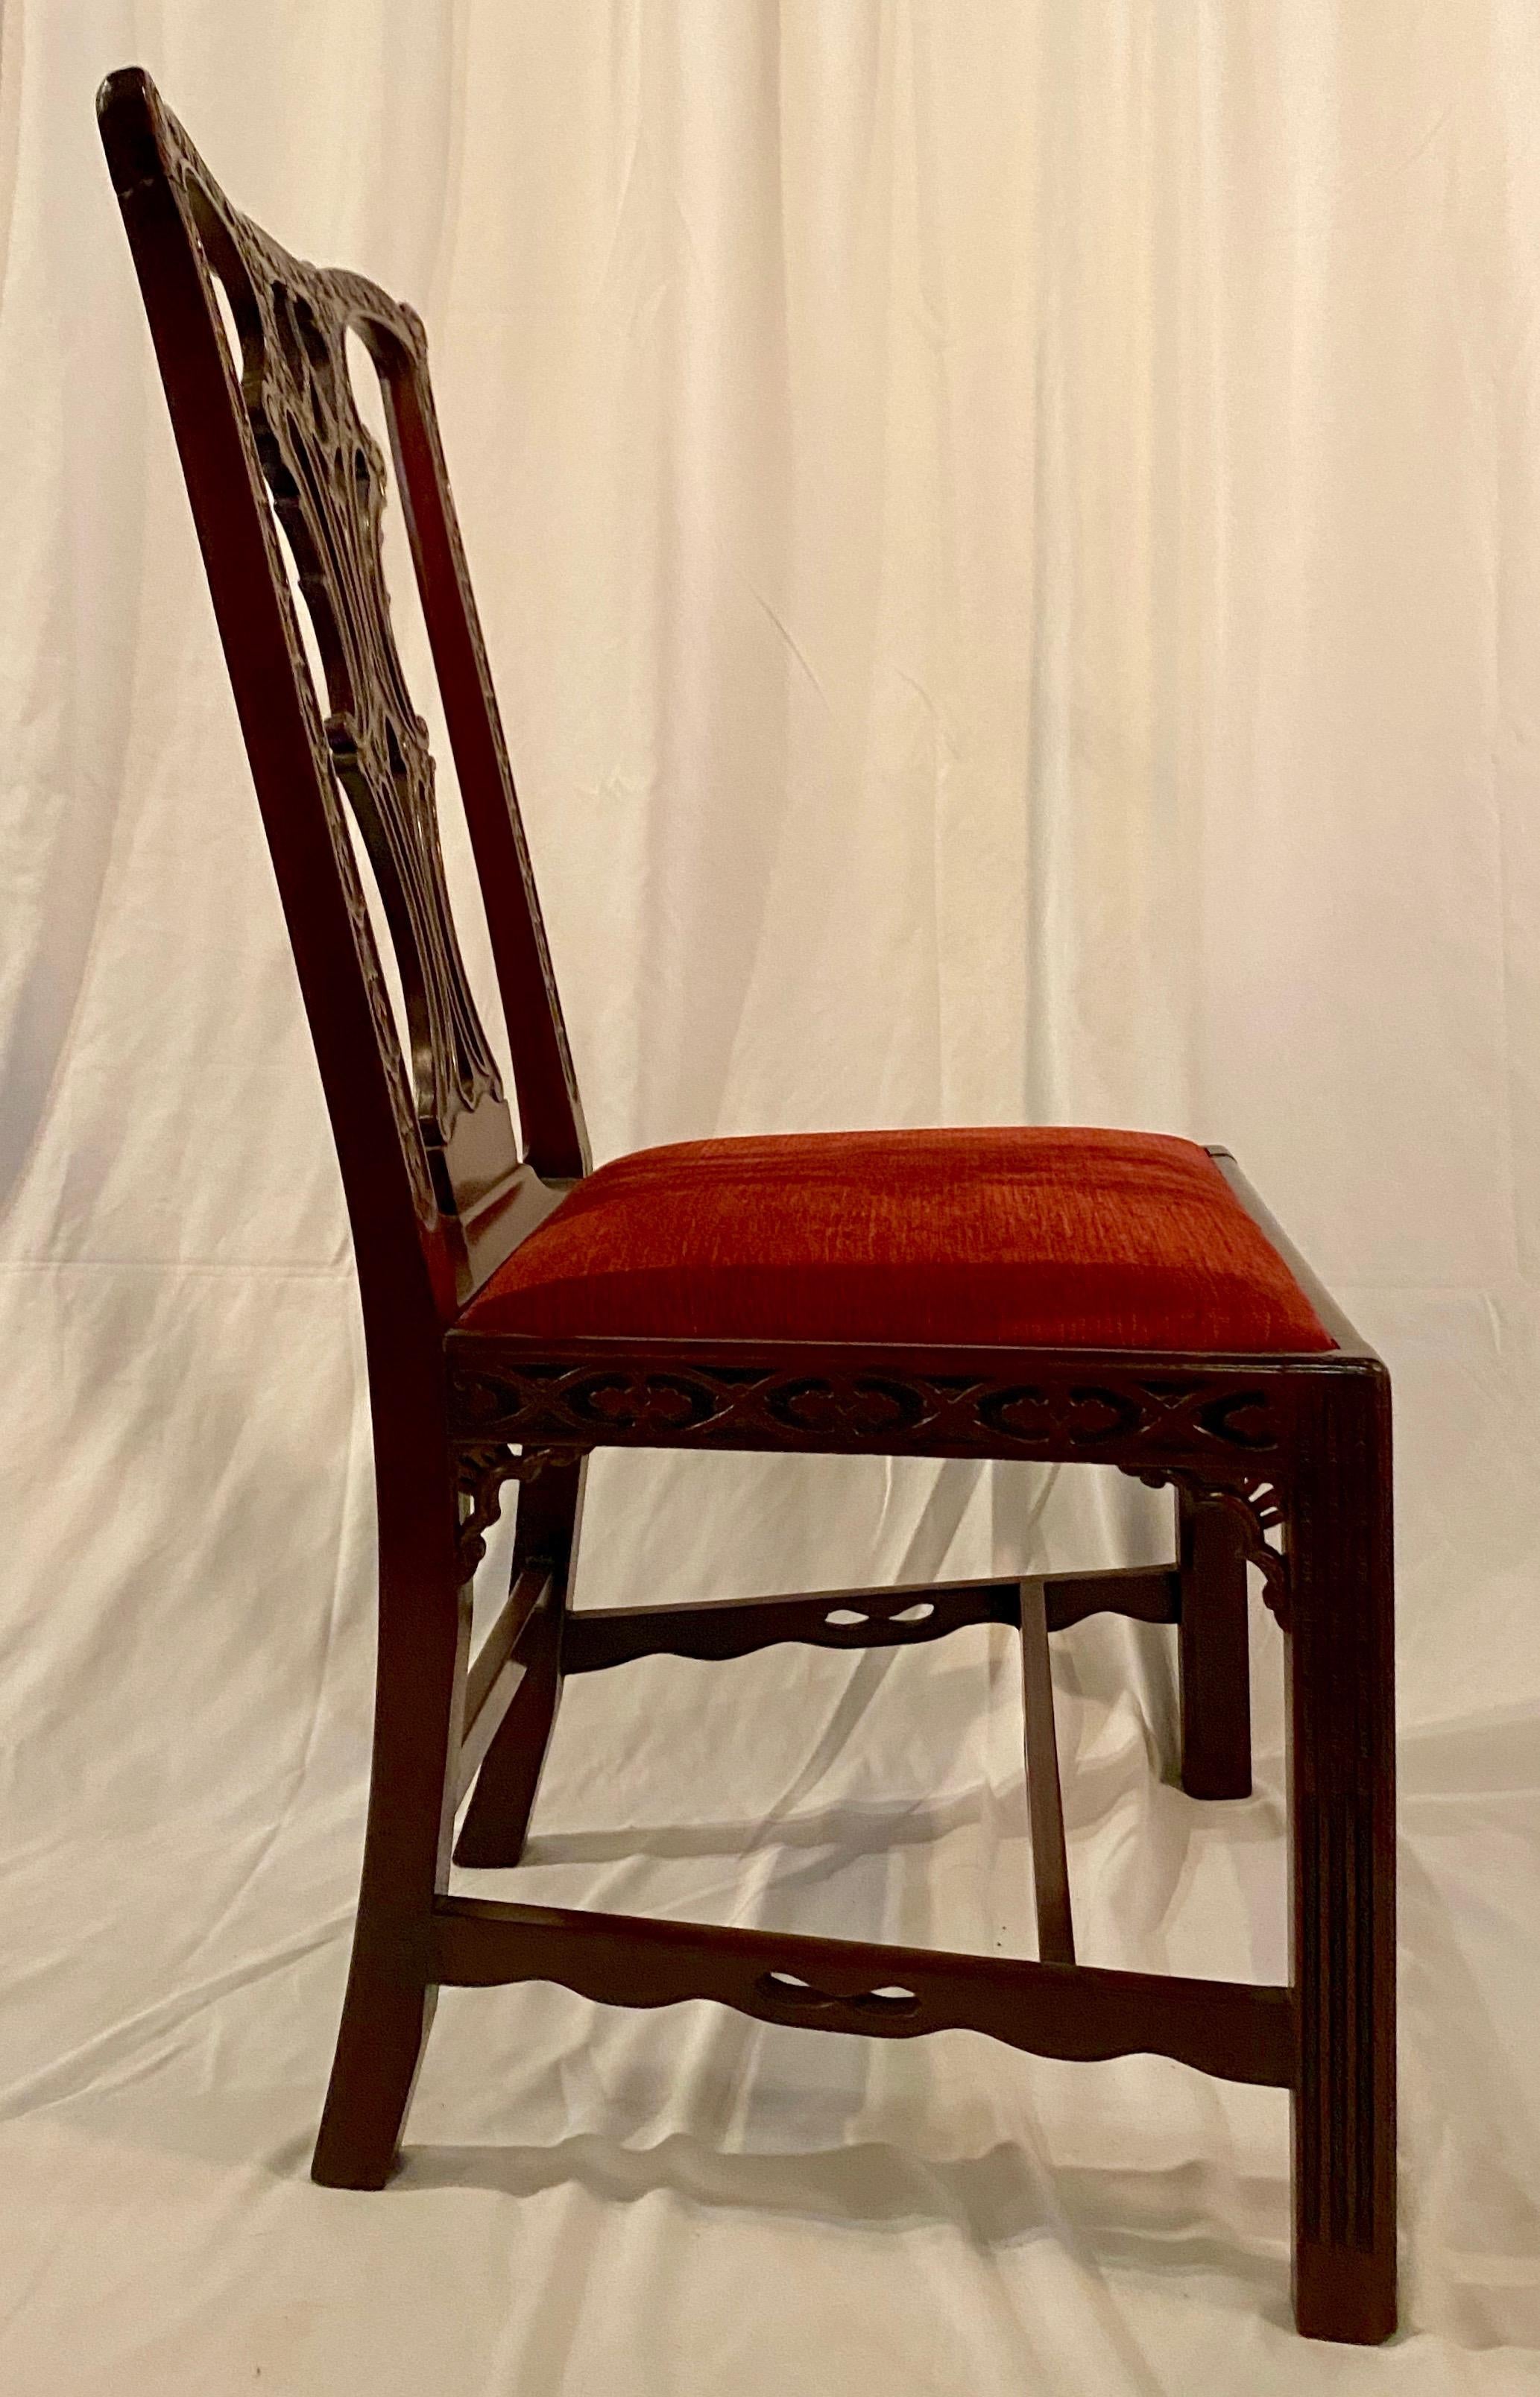 Antique English Mahogany Chair Fretwork Design Chippendale, circa 1870-1880 In Good Condition For Sale In New Orleans, LA